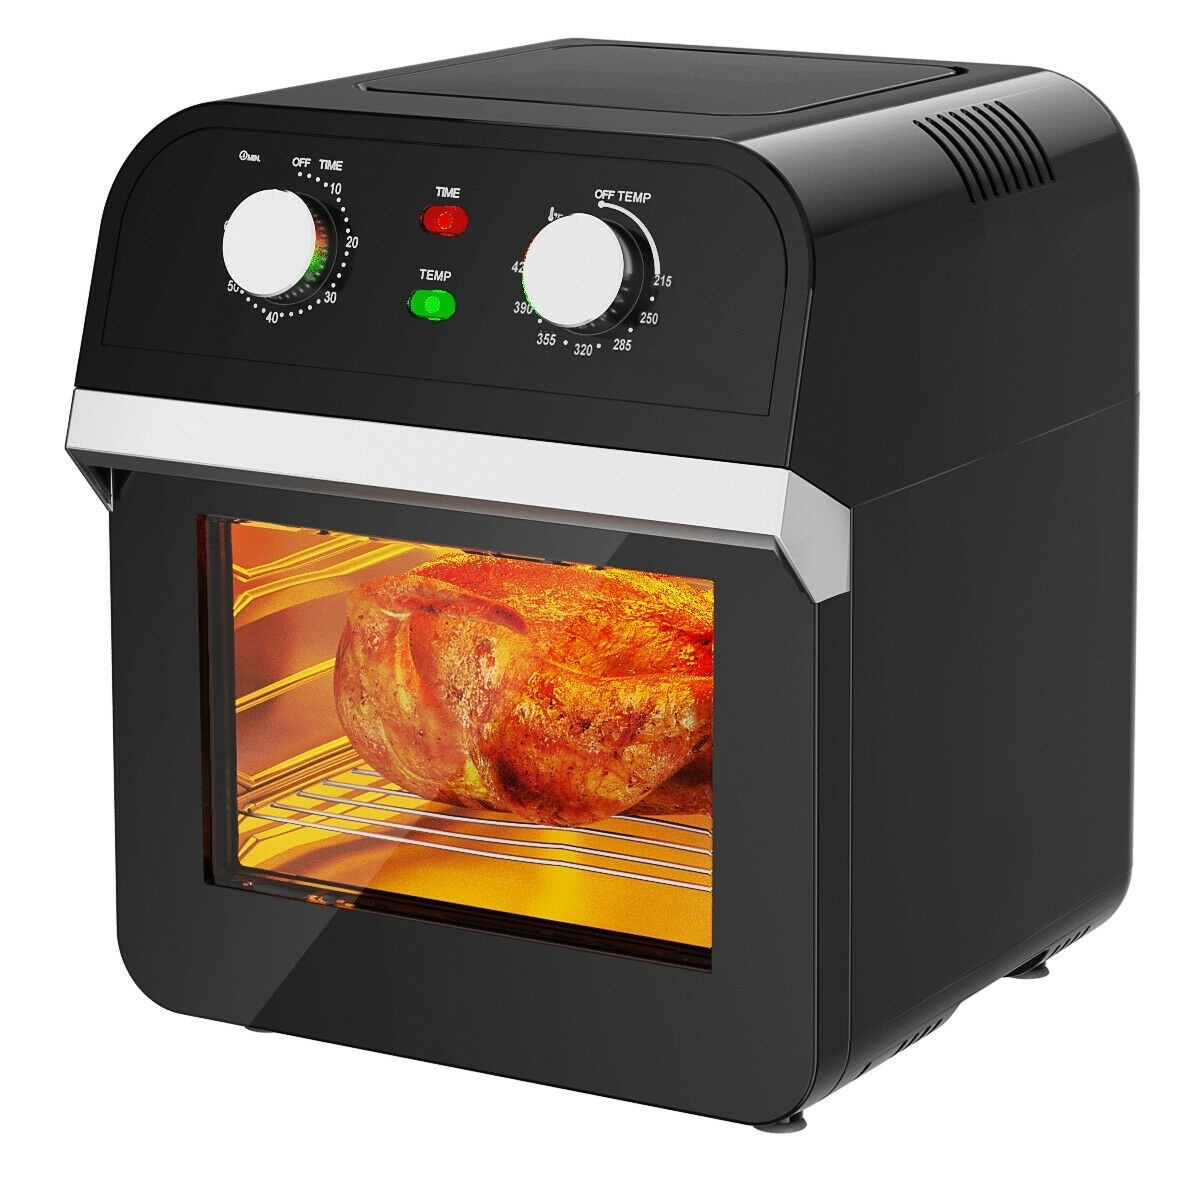 1600W Air Fryer Oven, 12.7QT Large Capacity Air Fryer Oven with ...